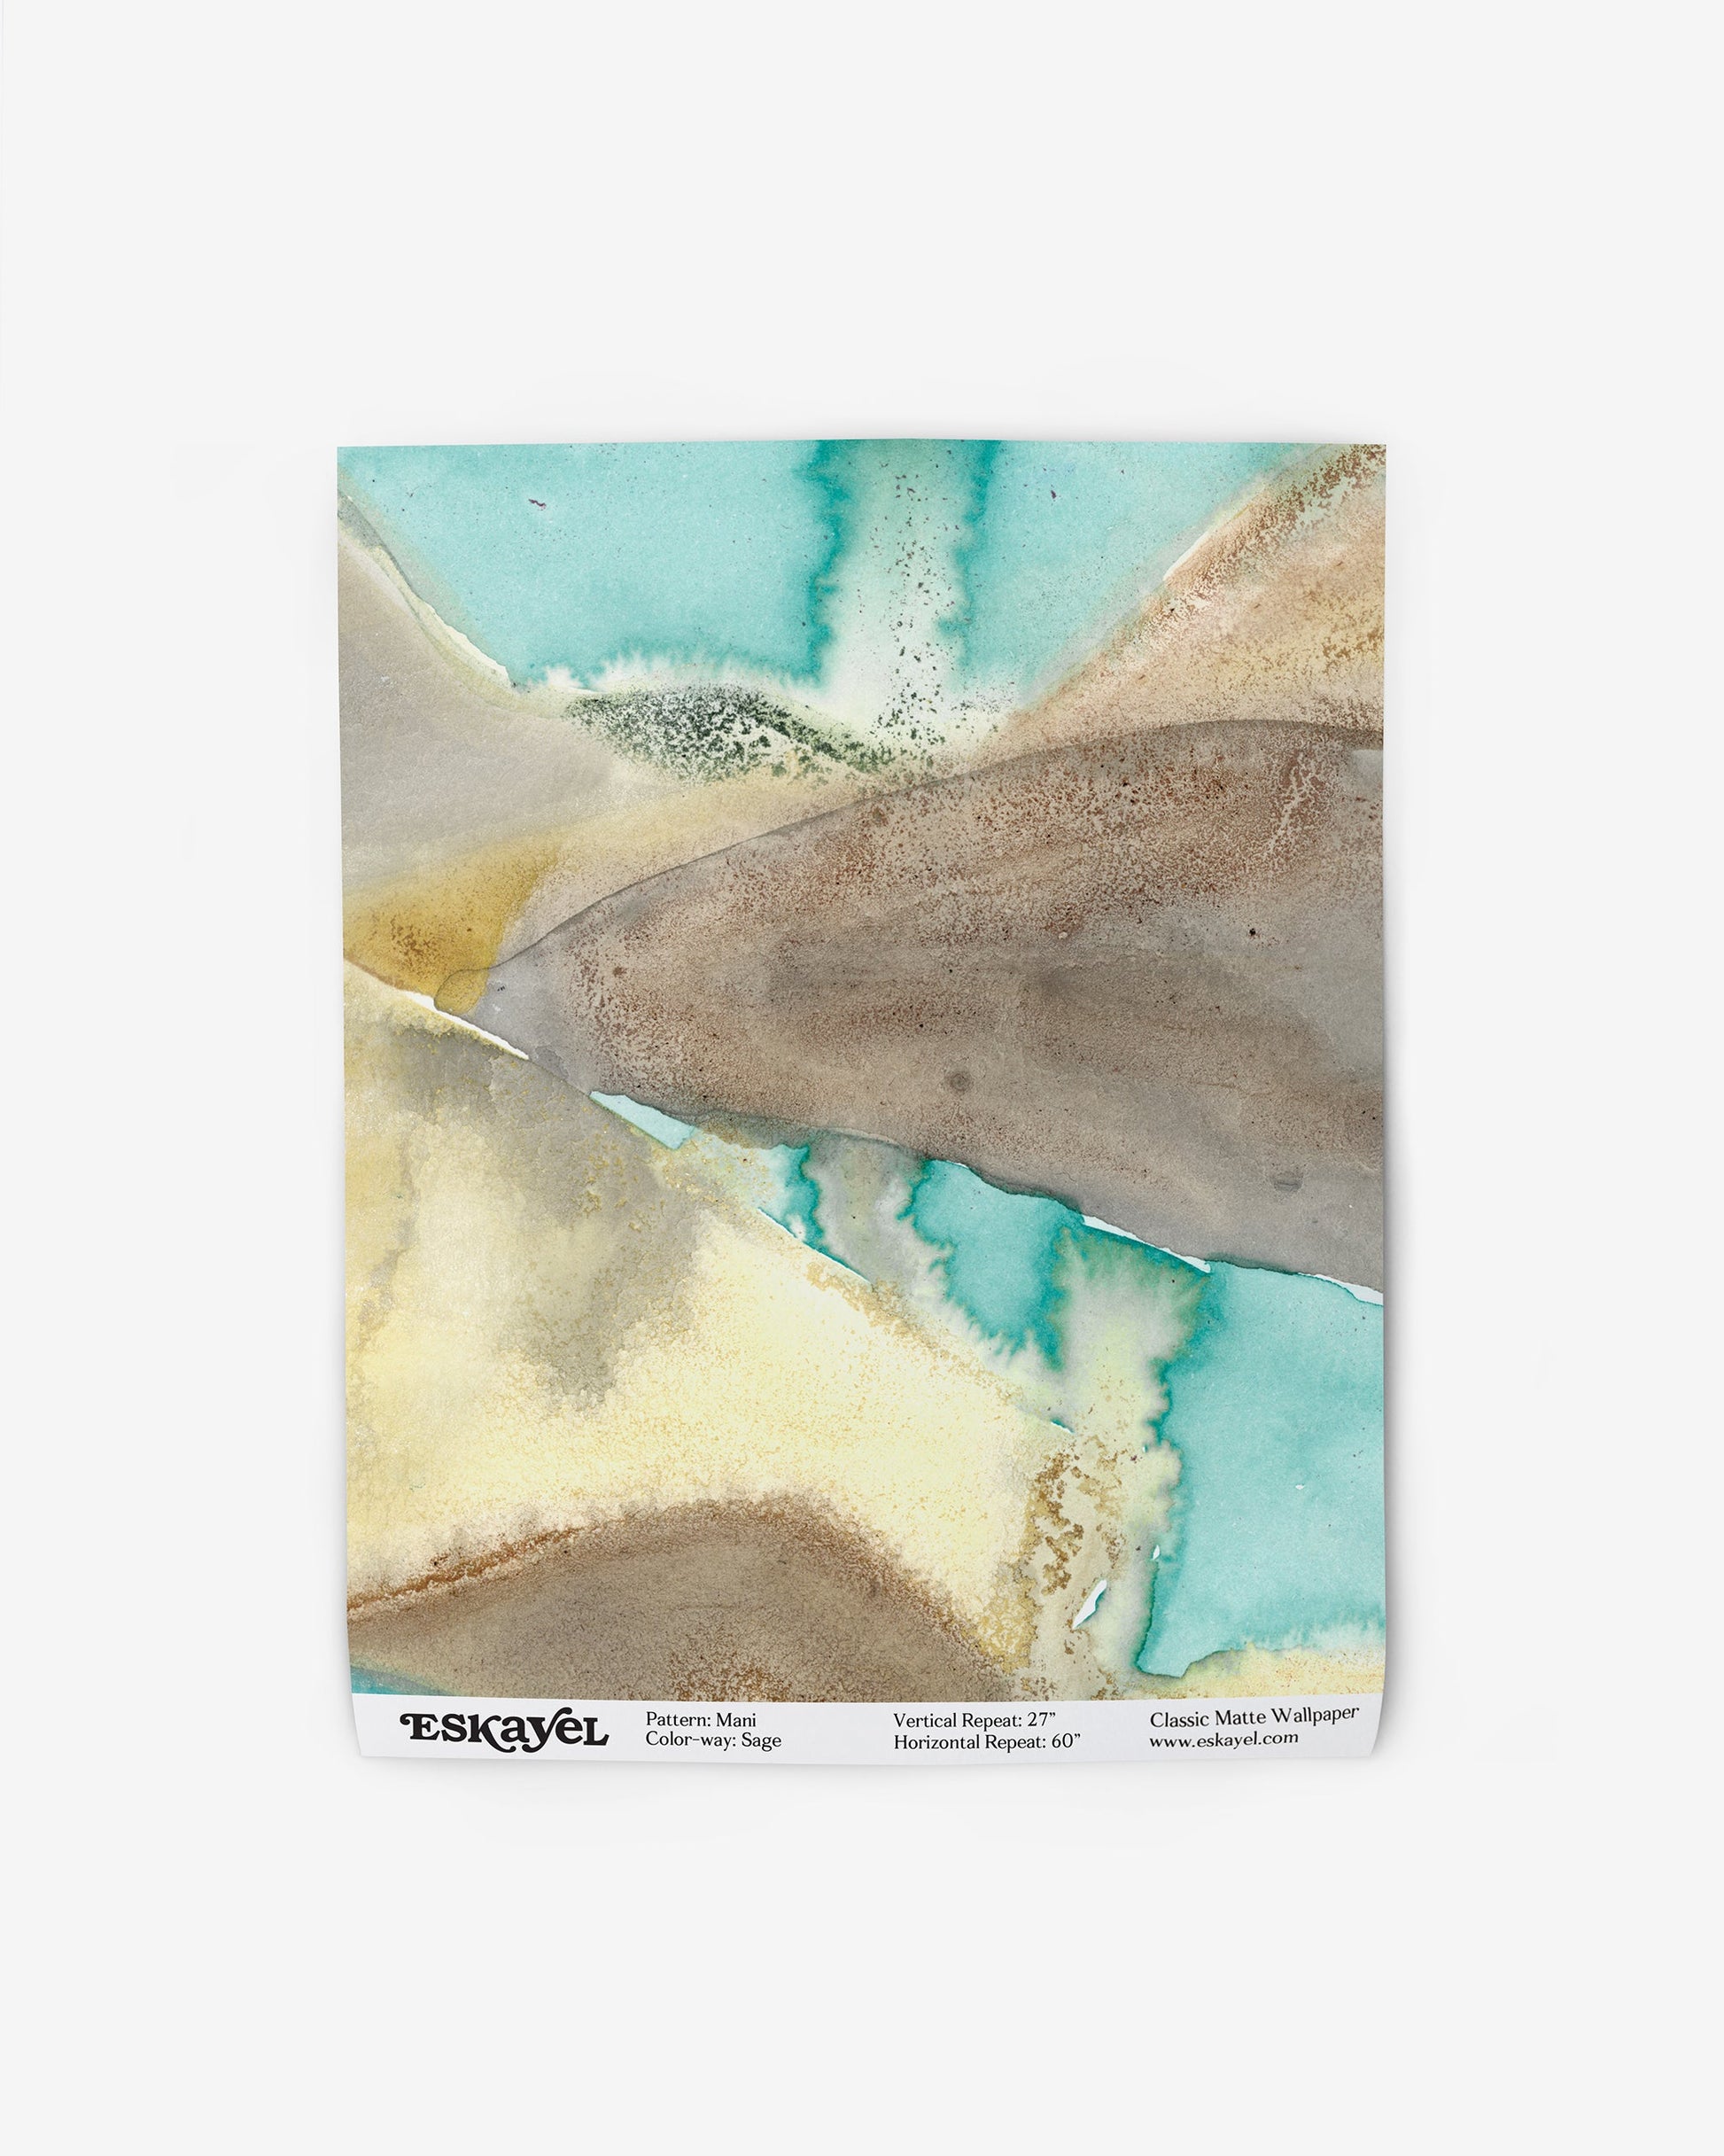 A Mani Wallpaper Sample||Sage watercolor painting of a beach scene.